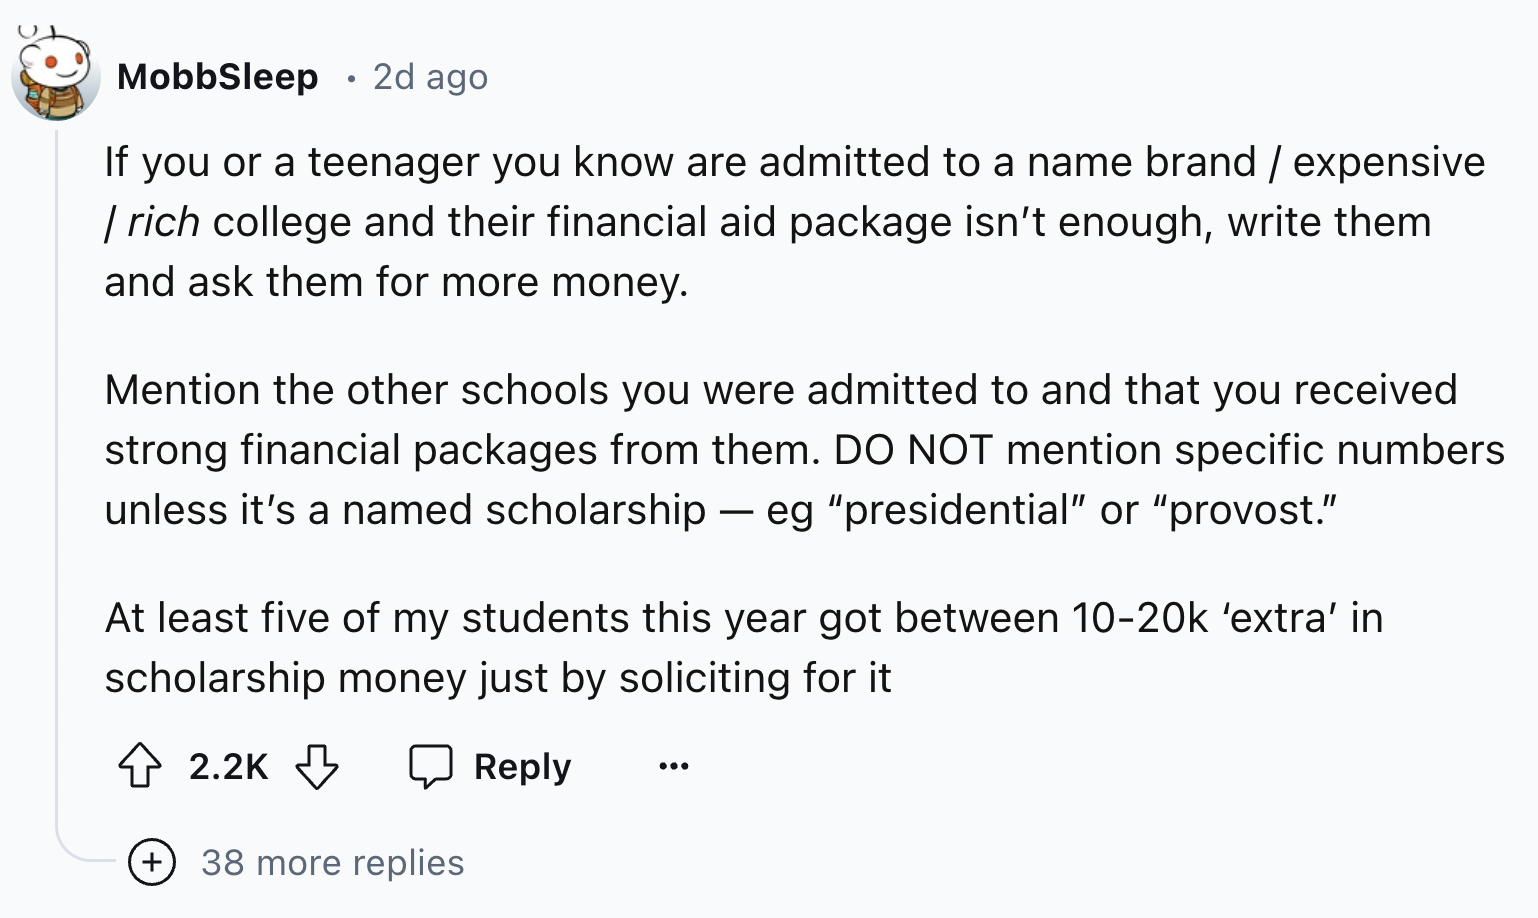 document - MobbSleep 2d ago If you or a teenager you know are admitted to a name brand expensive | rich college and their financial aid package isn't enough, write them and ask them for more money. Mention the other schools you were admitted to and that y